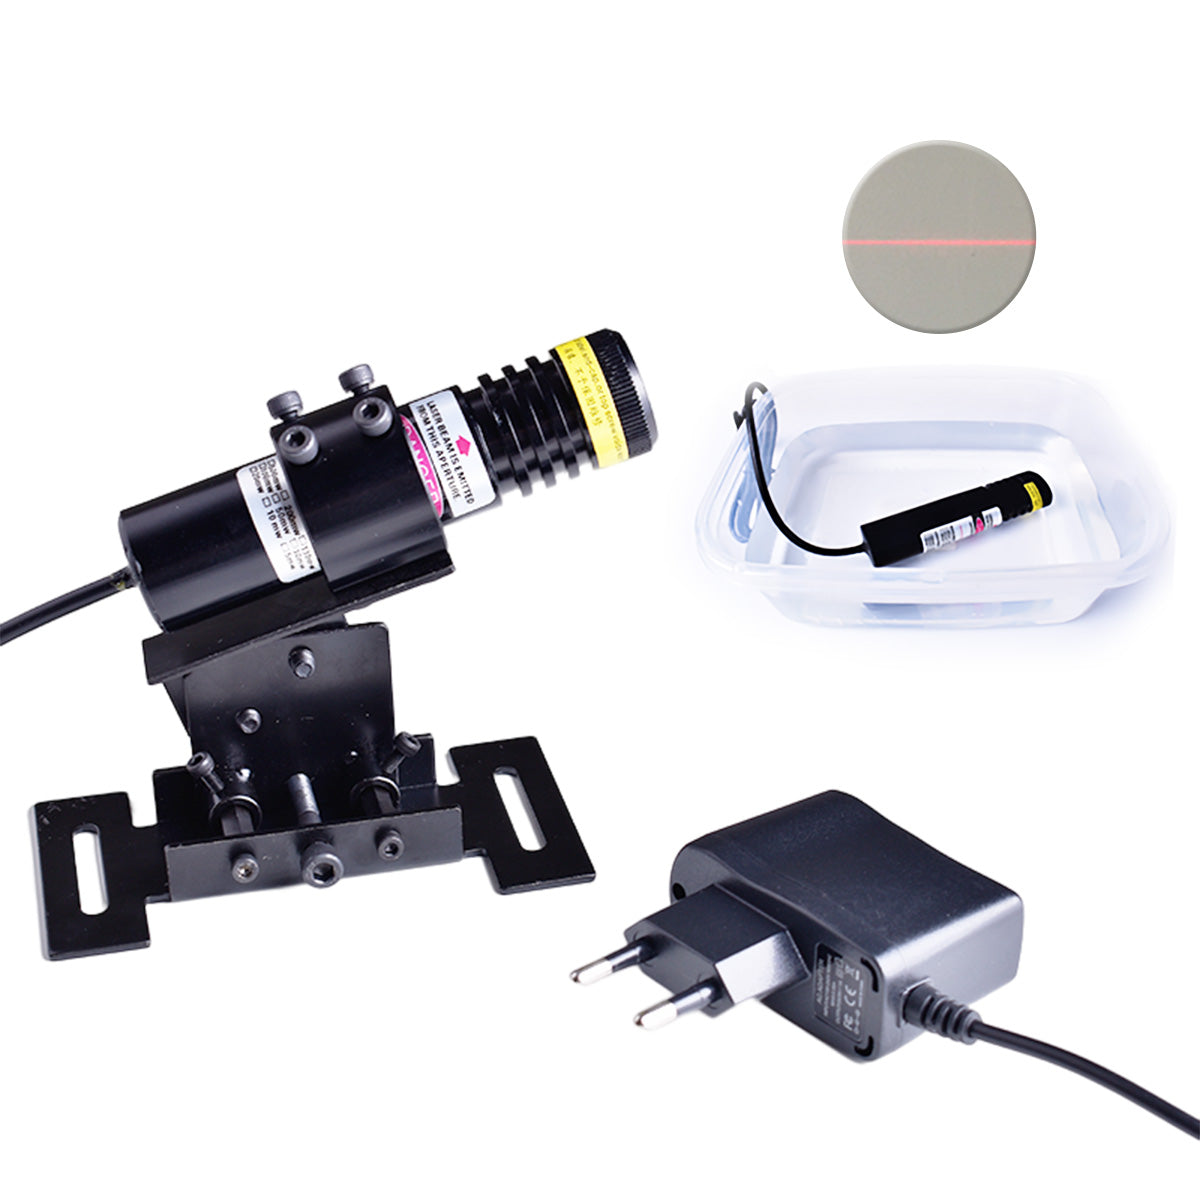 Waterproof Set 26*105 660nm 200mw 5V Stone Cutting Machine Focusable Laser Beam Module Locator Red Laser Line Positioning